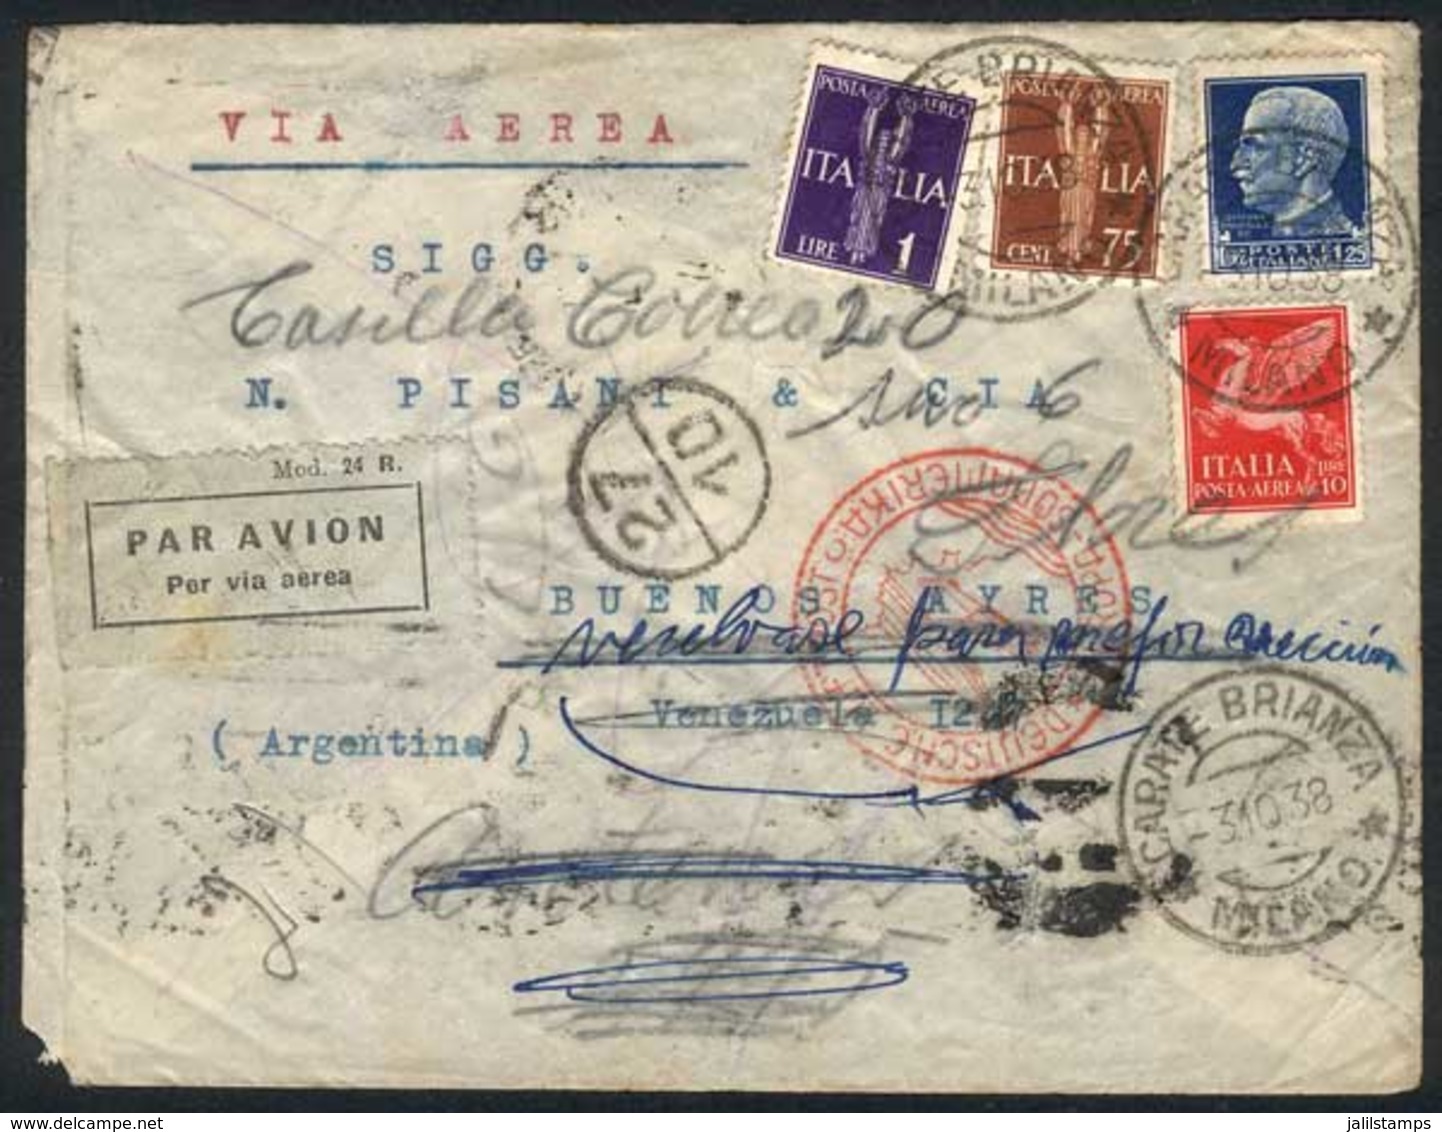 ITALY: Airmail Cover Sent From Carate Brianza To Buenos Aires On 10/MAR/1938, Franked With Interesting 13 Lire Postage,  - Unclassified